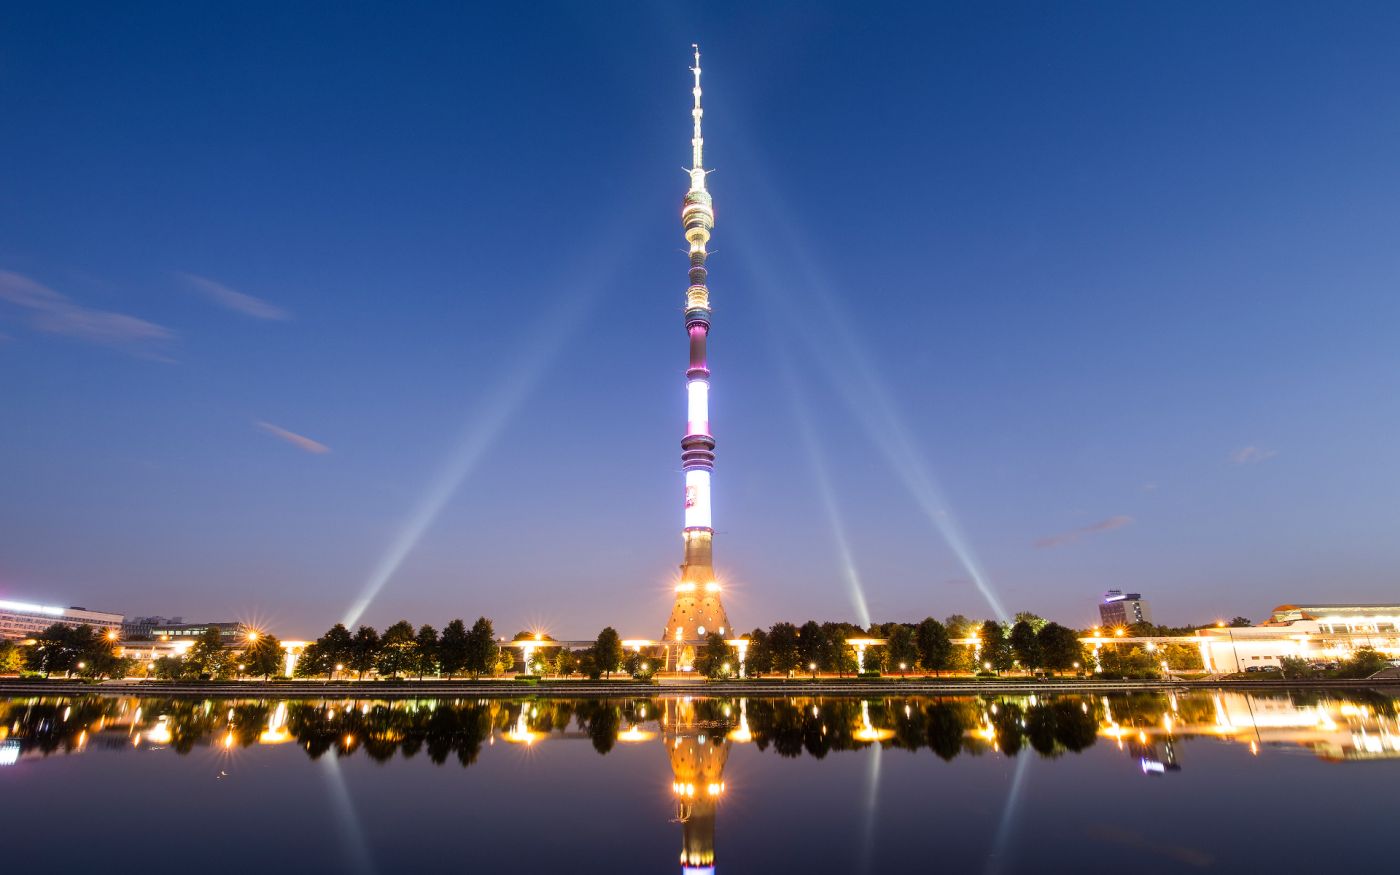 The Russians Have One of the Tallest Towers